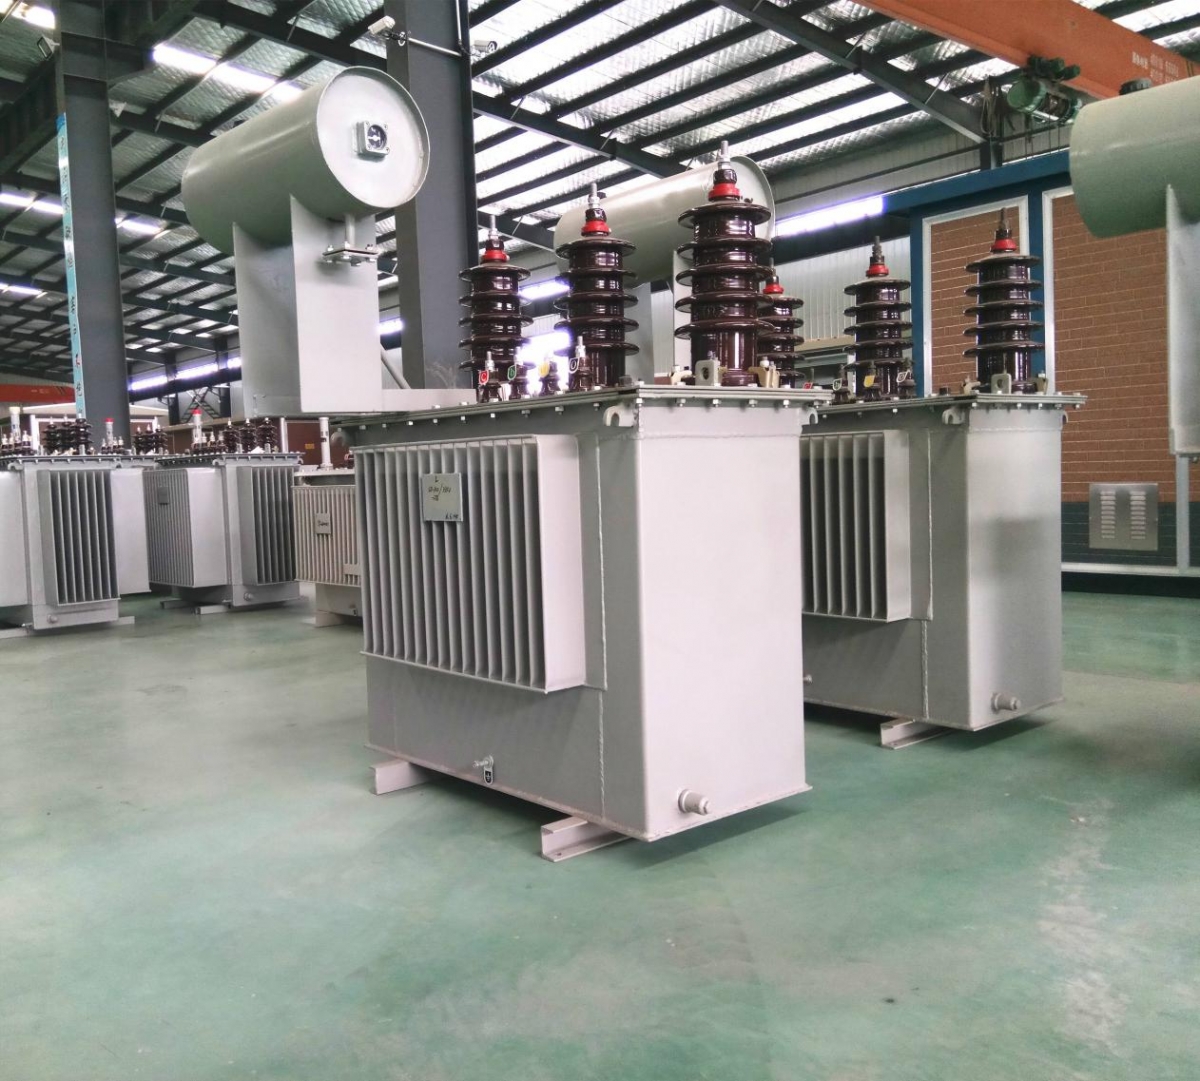 What’s the difference between an industrial power transformer and an ordinary power transformer?-SPL- power transformer,electrical transformer,Combined compact substation,Metalclad AC Enclosed Switchgear,Low Voltage Switchgear,Indoor AC Metal Clad Intermediate Switchgear,Non-encapsulated Dry-type Power Transformer,Unwrapped coil dry-type transformer,Epoxy resin cast silicon steel sheet dry-type transformer,Epoxy resin cast amorphous alloy dry-type transformer,Amorphous alloy oil-immersed power transformer,Silicon steel sheet oil-immersed power,electric transformer,Distribution Transformer,voltage transformer,step-down transformer,reducing transformer,low-loss power transformer,loss power transformer,Oil-type Transformer,Oil Distribution Transformer,Transformer-Oil-lmmersed,Oil Transformer,Oil Immersed Transformer,three phase oil immersed power transformer,oil filled electrical transformer,Sealed amorphous alloy power transformer,Dry Type Transformer,dry Transformer,Cast Resin Dry Type Transformer,dry-type transformer,resin-casting type transformer,resinated dry type transformer,CRDT,Unwrapped coil power transformer,three phase dry Transformer,articulated unit substation,AS,Modular substation,transformer substation,electric substation,Power Sub-station,Preinstalled substation,YBM,prefabricated substation,Distribution Substation,compact substation,MV power stations,LV power stations,HV power stations,Switchgear Cabinet,MV Switchgear Cabinet,LV Switchgear Cabinet,HV Switchgear Cabinet,pull-out switch cabinet,Ac metal closed ring network switchgear,Indoor metal armored central switchgear,Box-type substation,custom transformers,customized transformers,Metal enclosed electrical switchgear,LV Switchgear Cabinet,